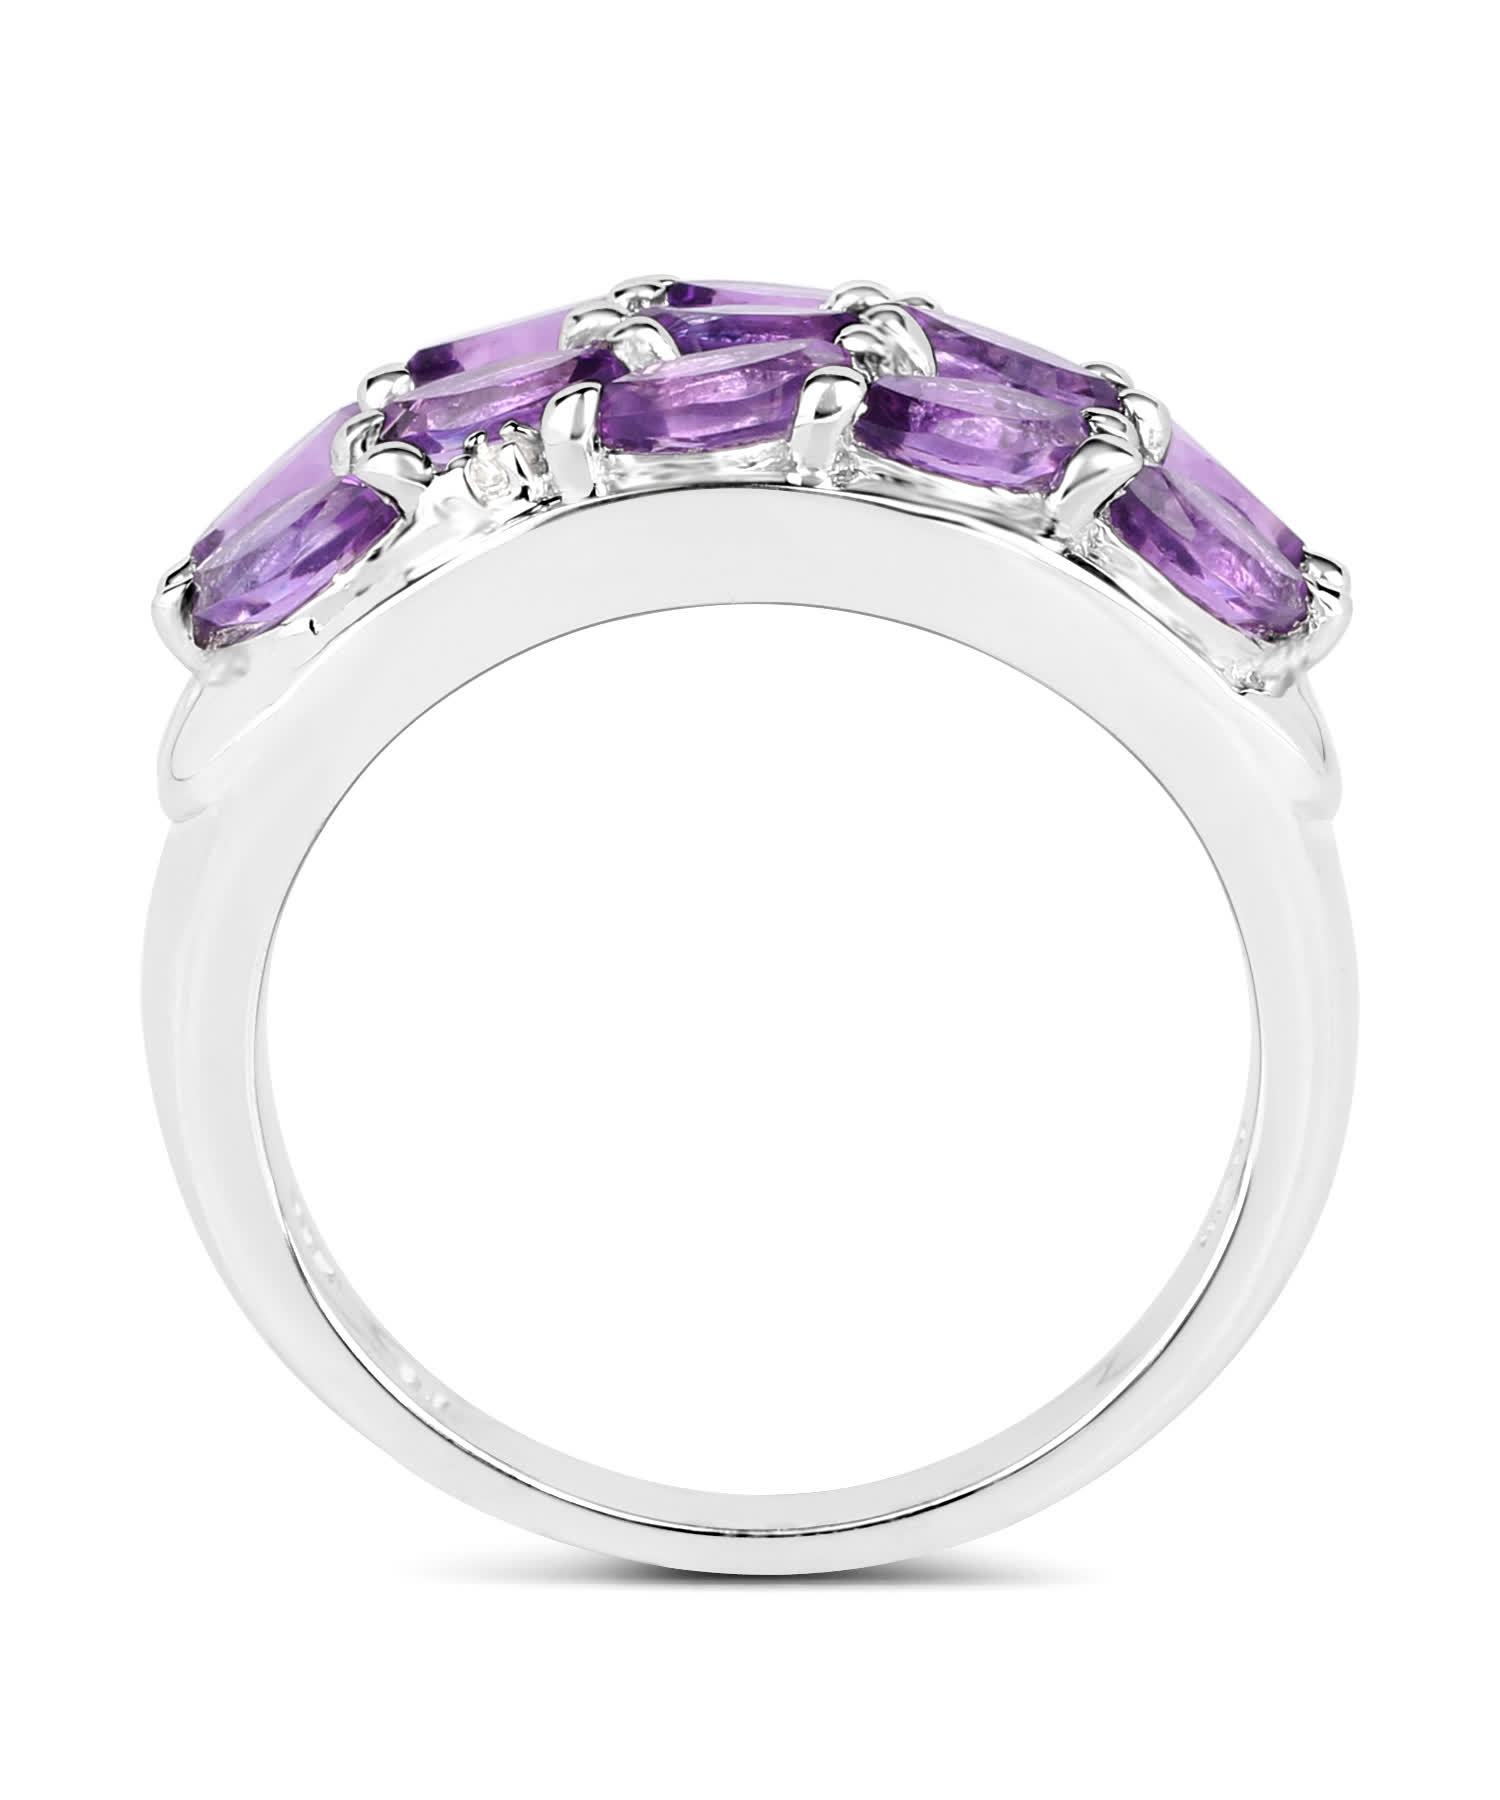 1.67ctw Natural Amethyst and Topaz Rhodium Plated 925 Sterling Silver Leaf Ring View 2